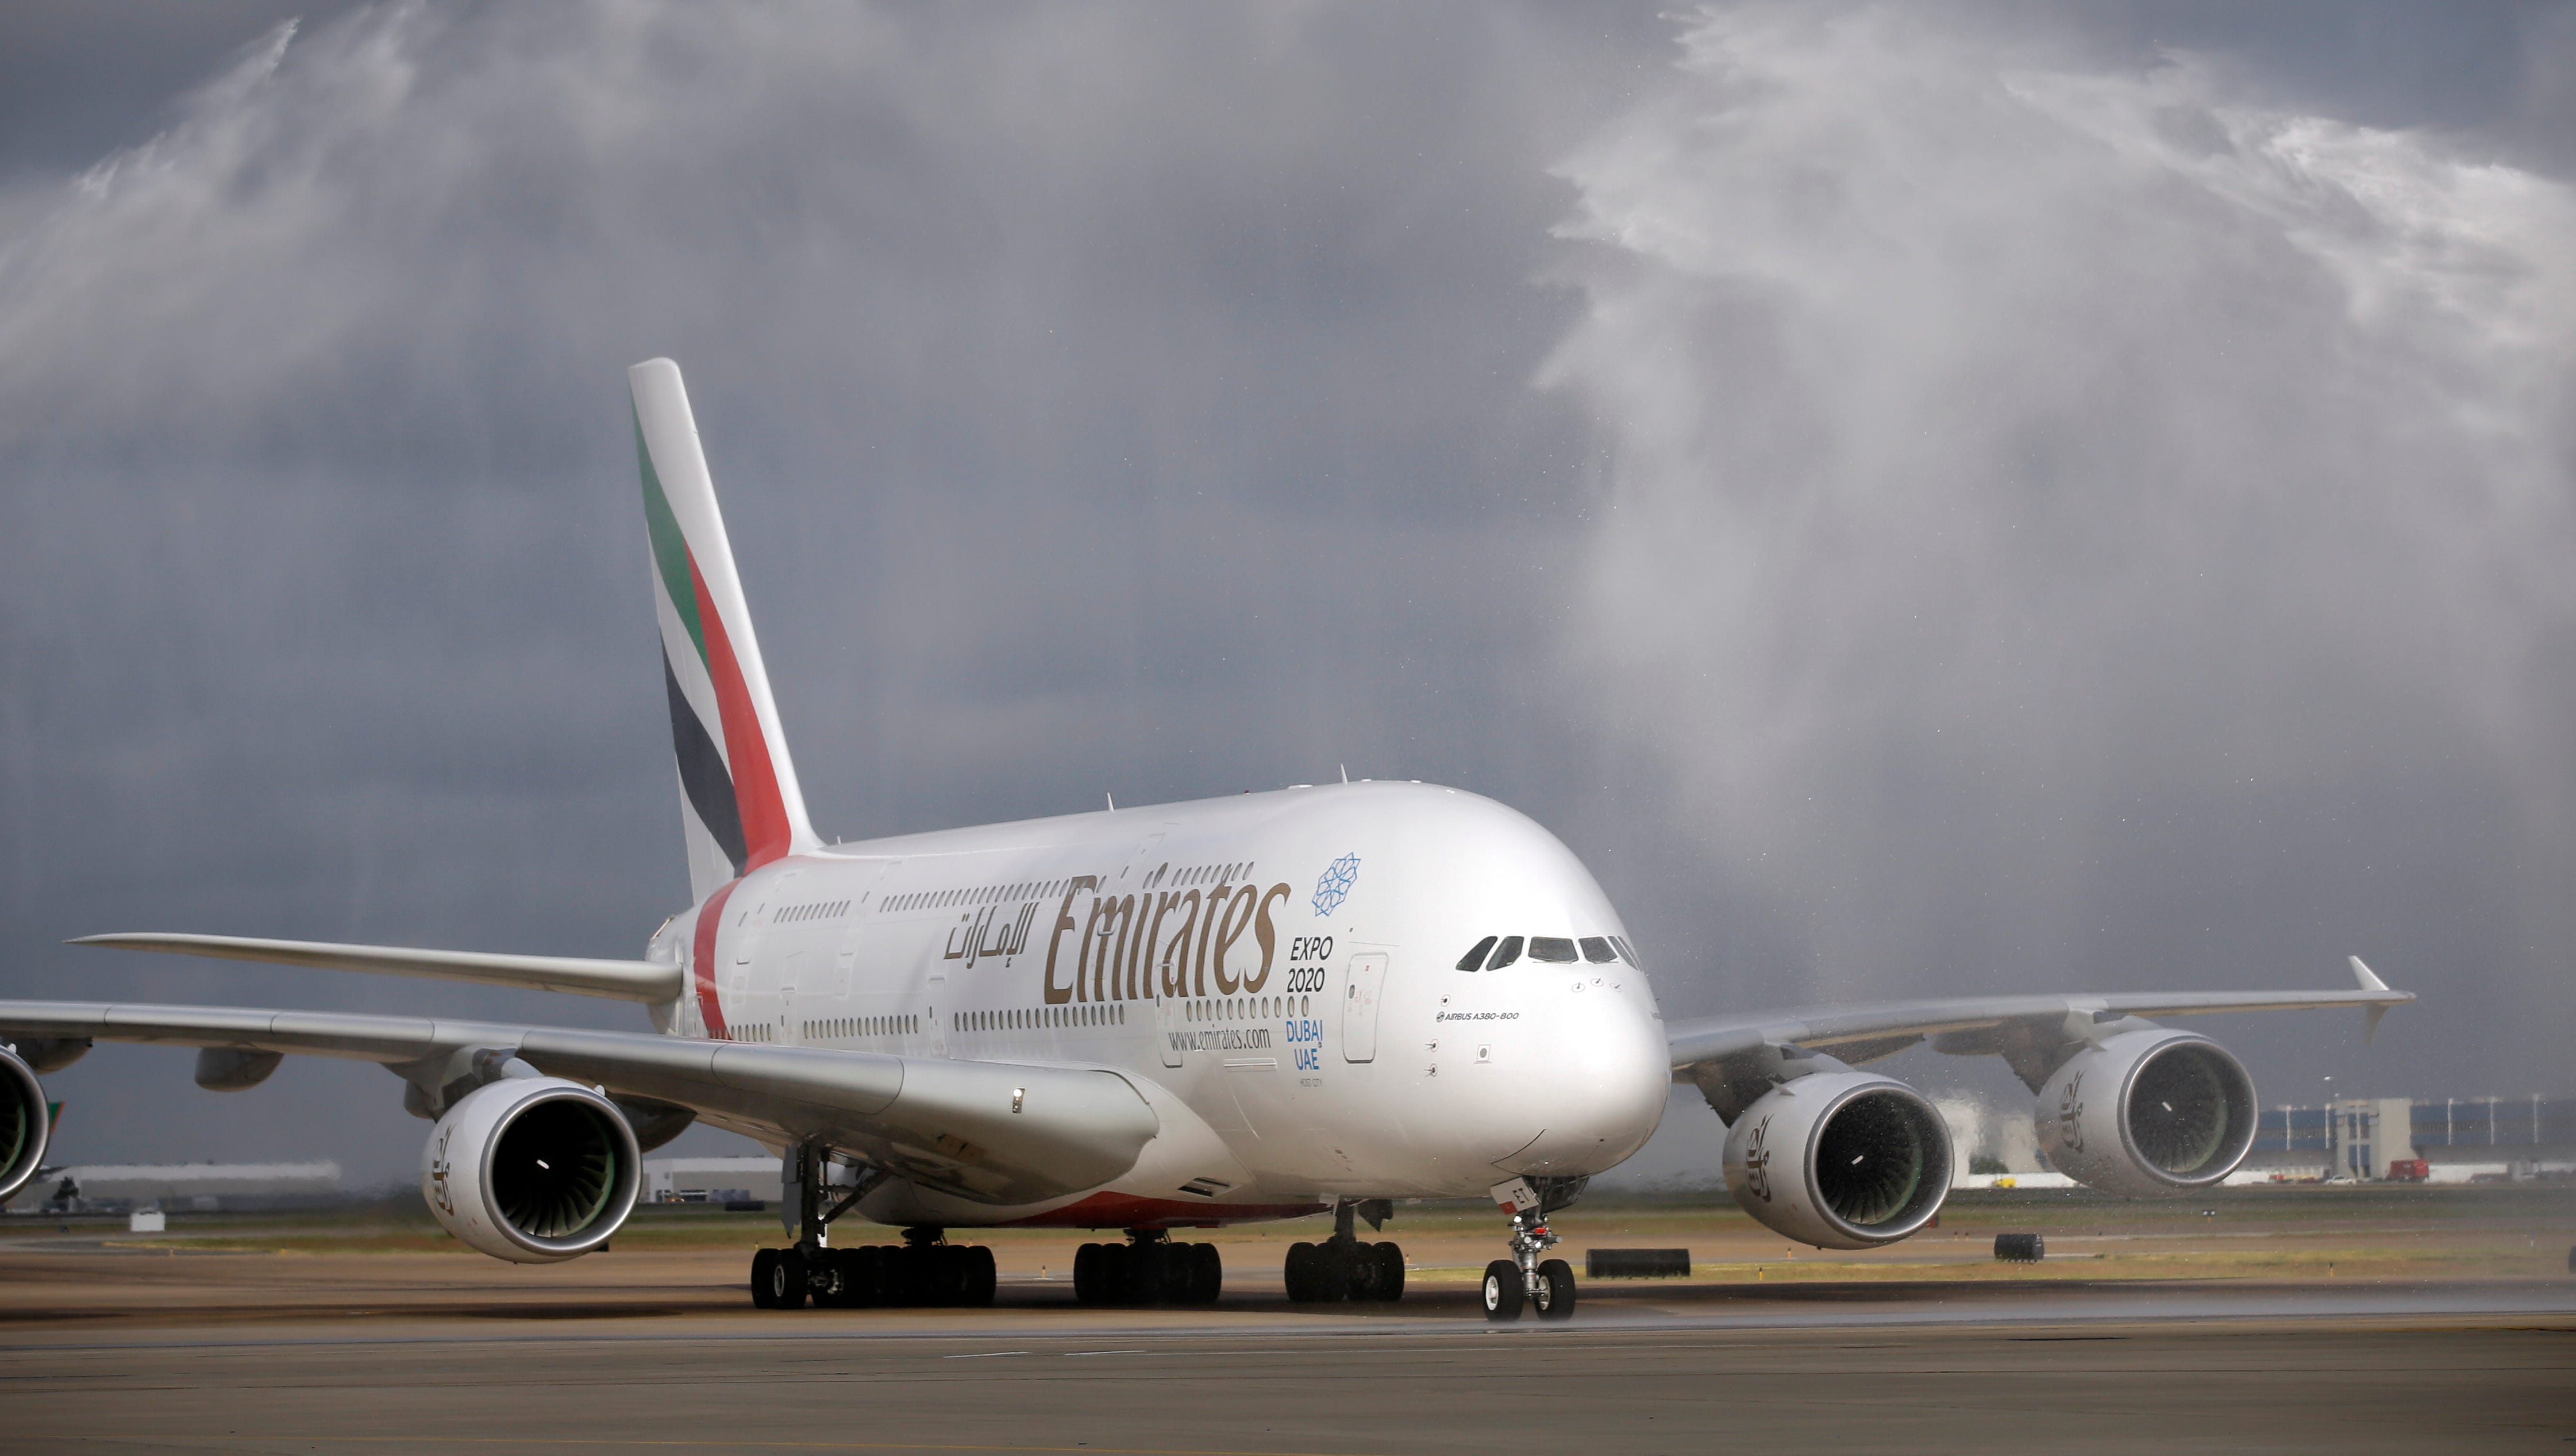 Emirates pushes A380 seating capacity past 600